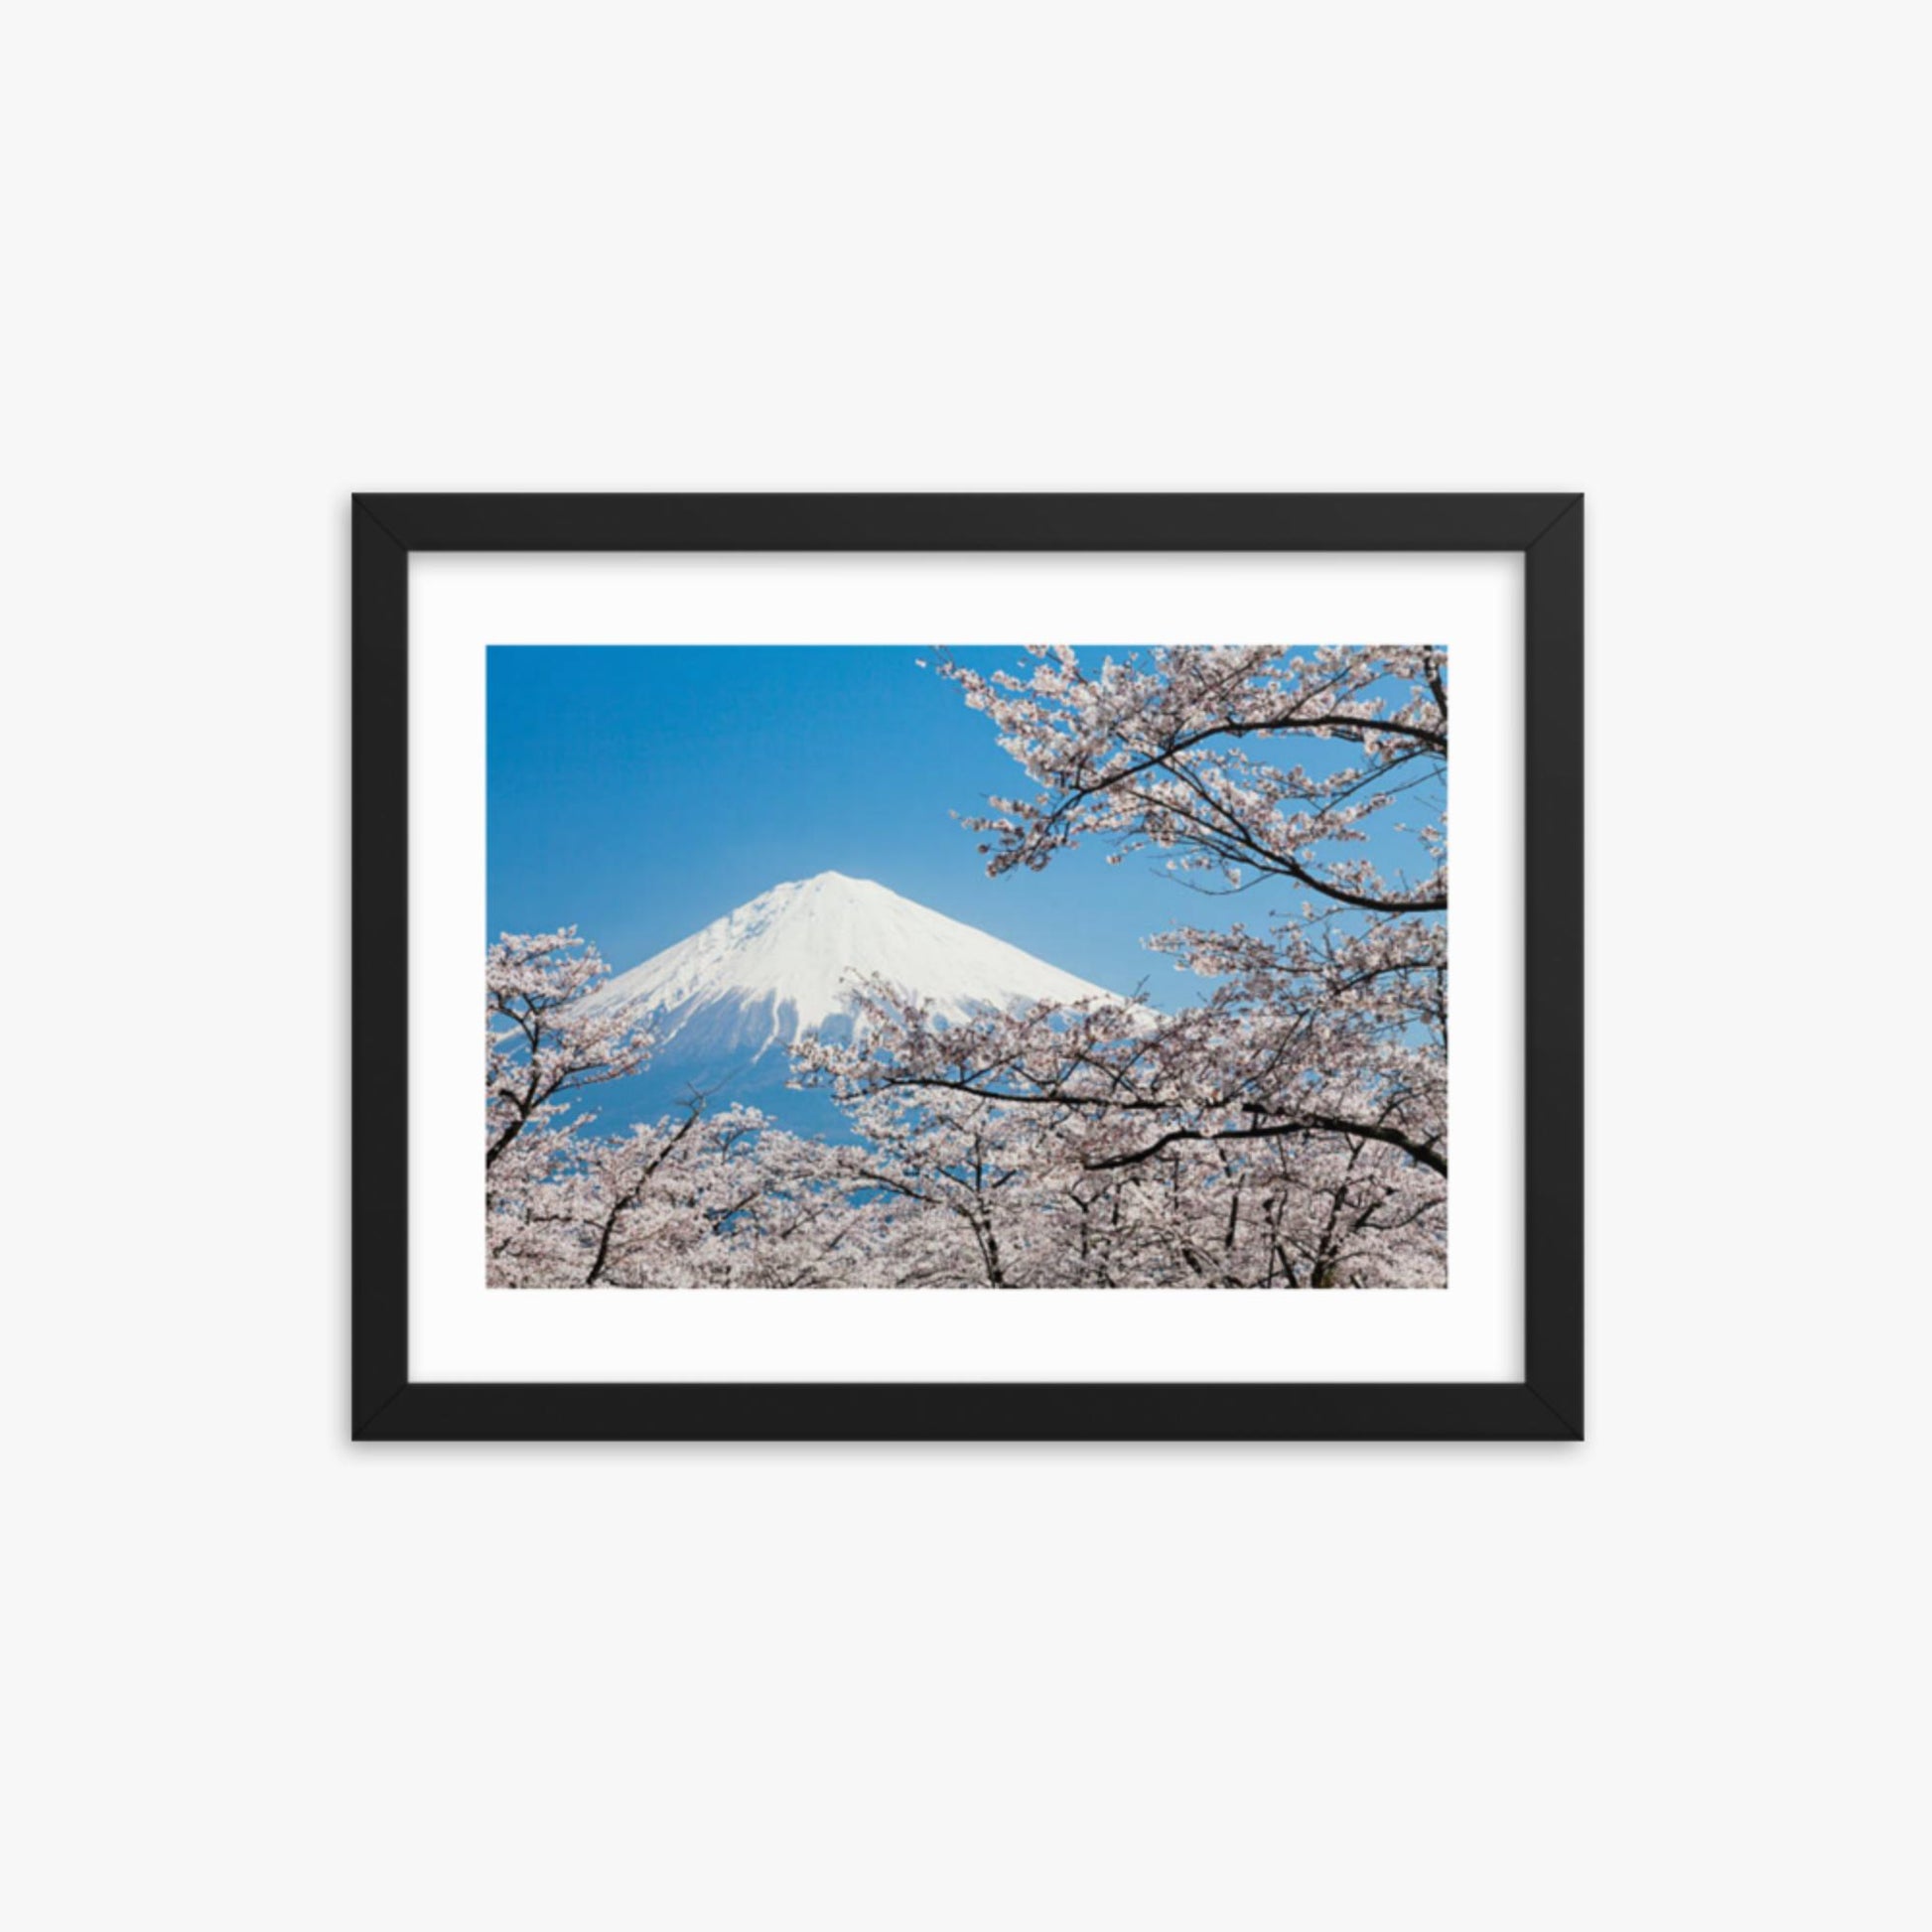 Mount Fuji & Cherry Blossoms 12x16 in Poster With Black Frame